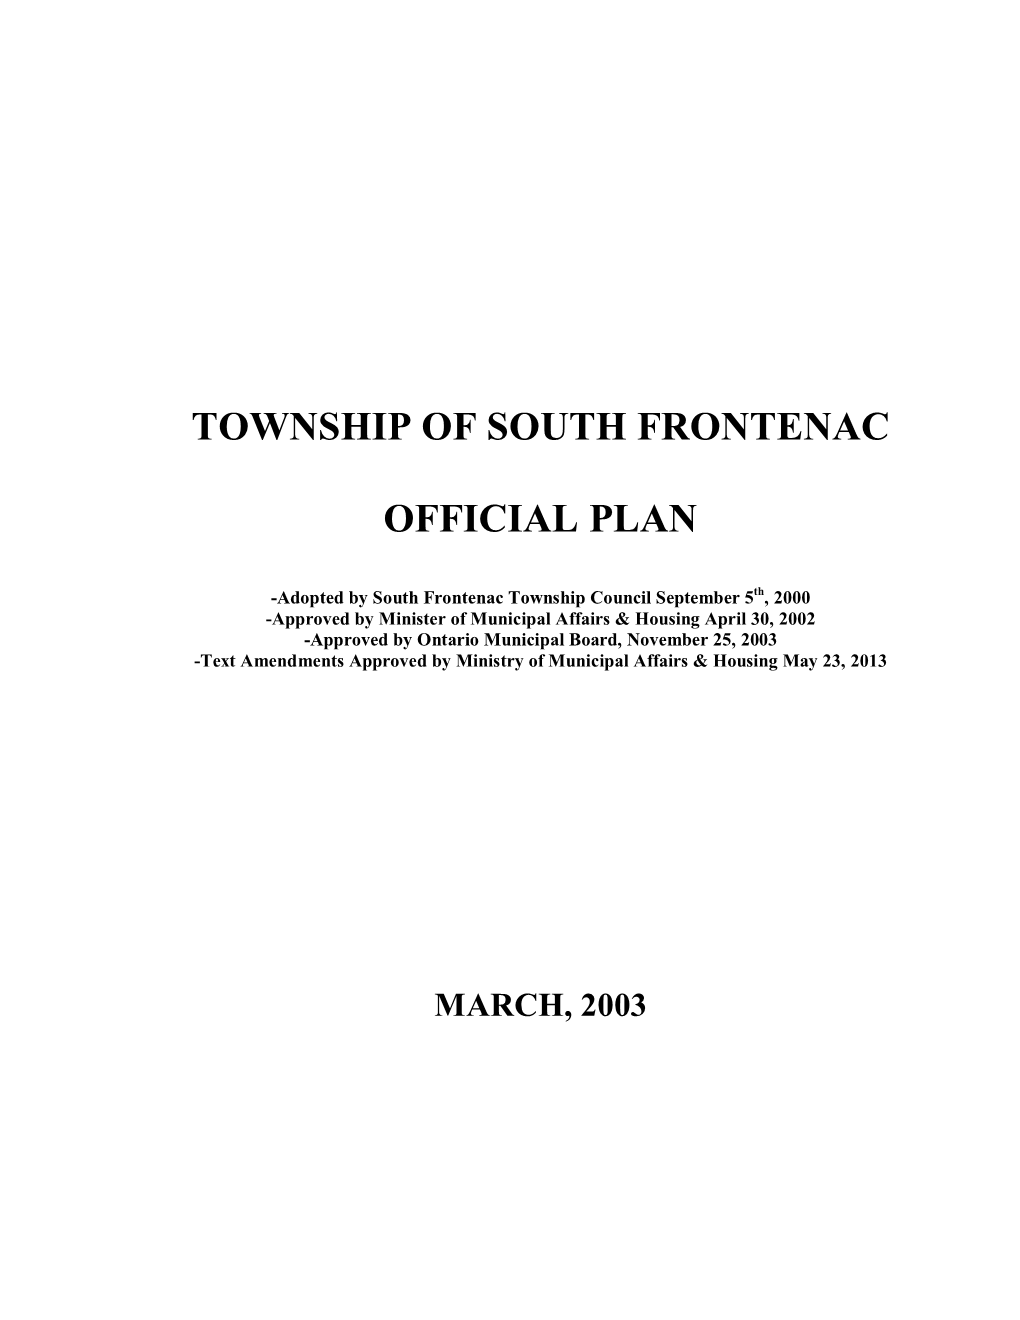 Township of South Frontenac Official Plan